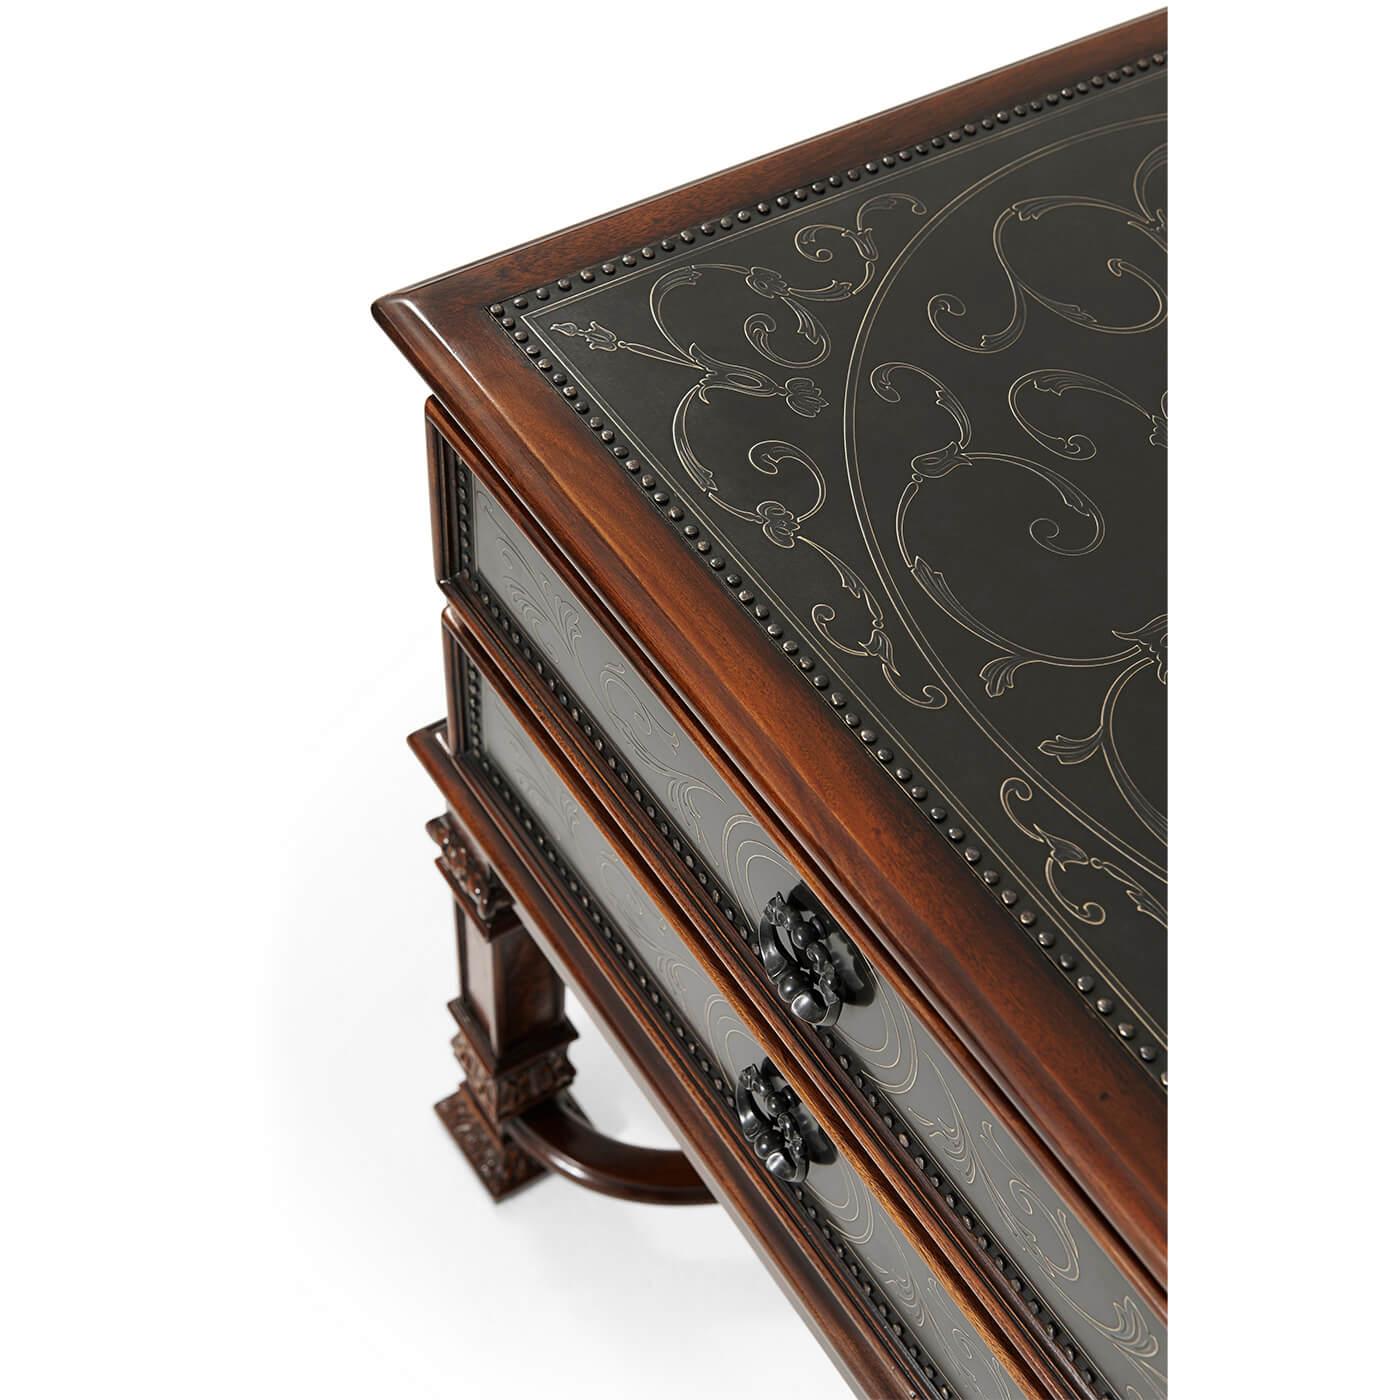 A French neo classic mahogany and poplar burl bedside chest with etched brass panel decoration, the square top above two drawers and side carrying handles, on carved and square panelled legs.

Dimensions: 24